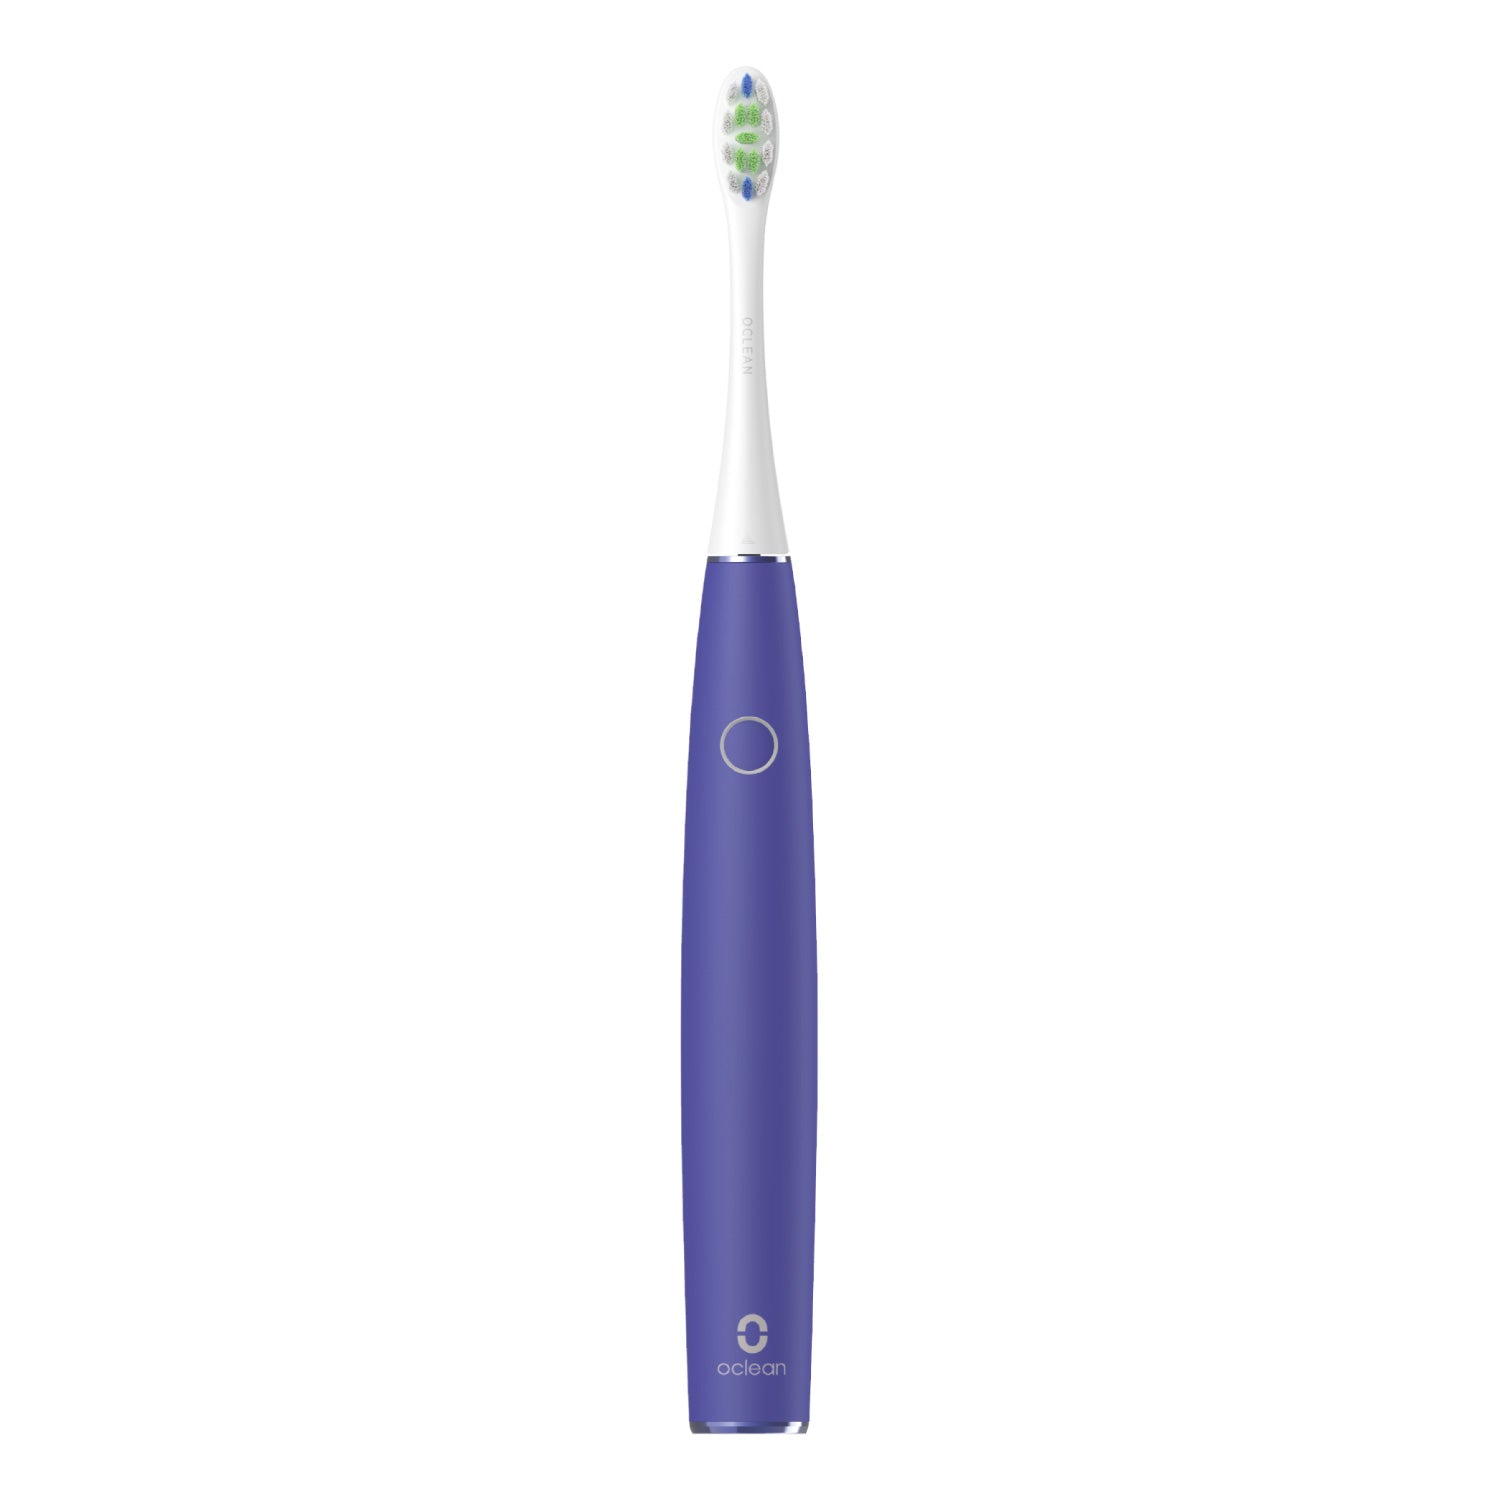 Oclean Air 2 Sonic Electric Toothbrush Toothbrushes Purple  Oclean Official